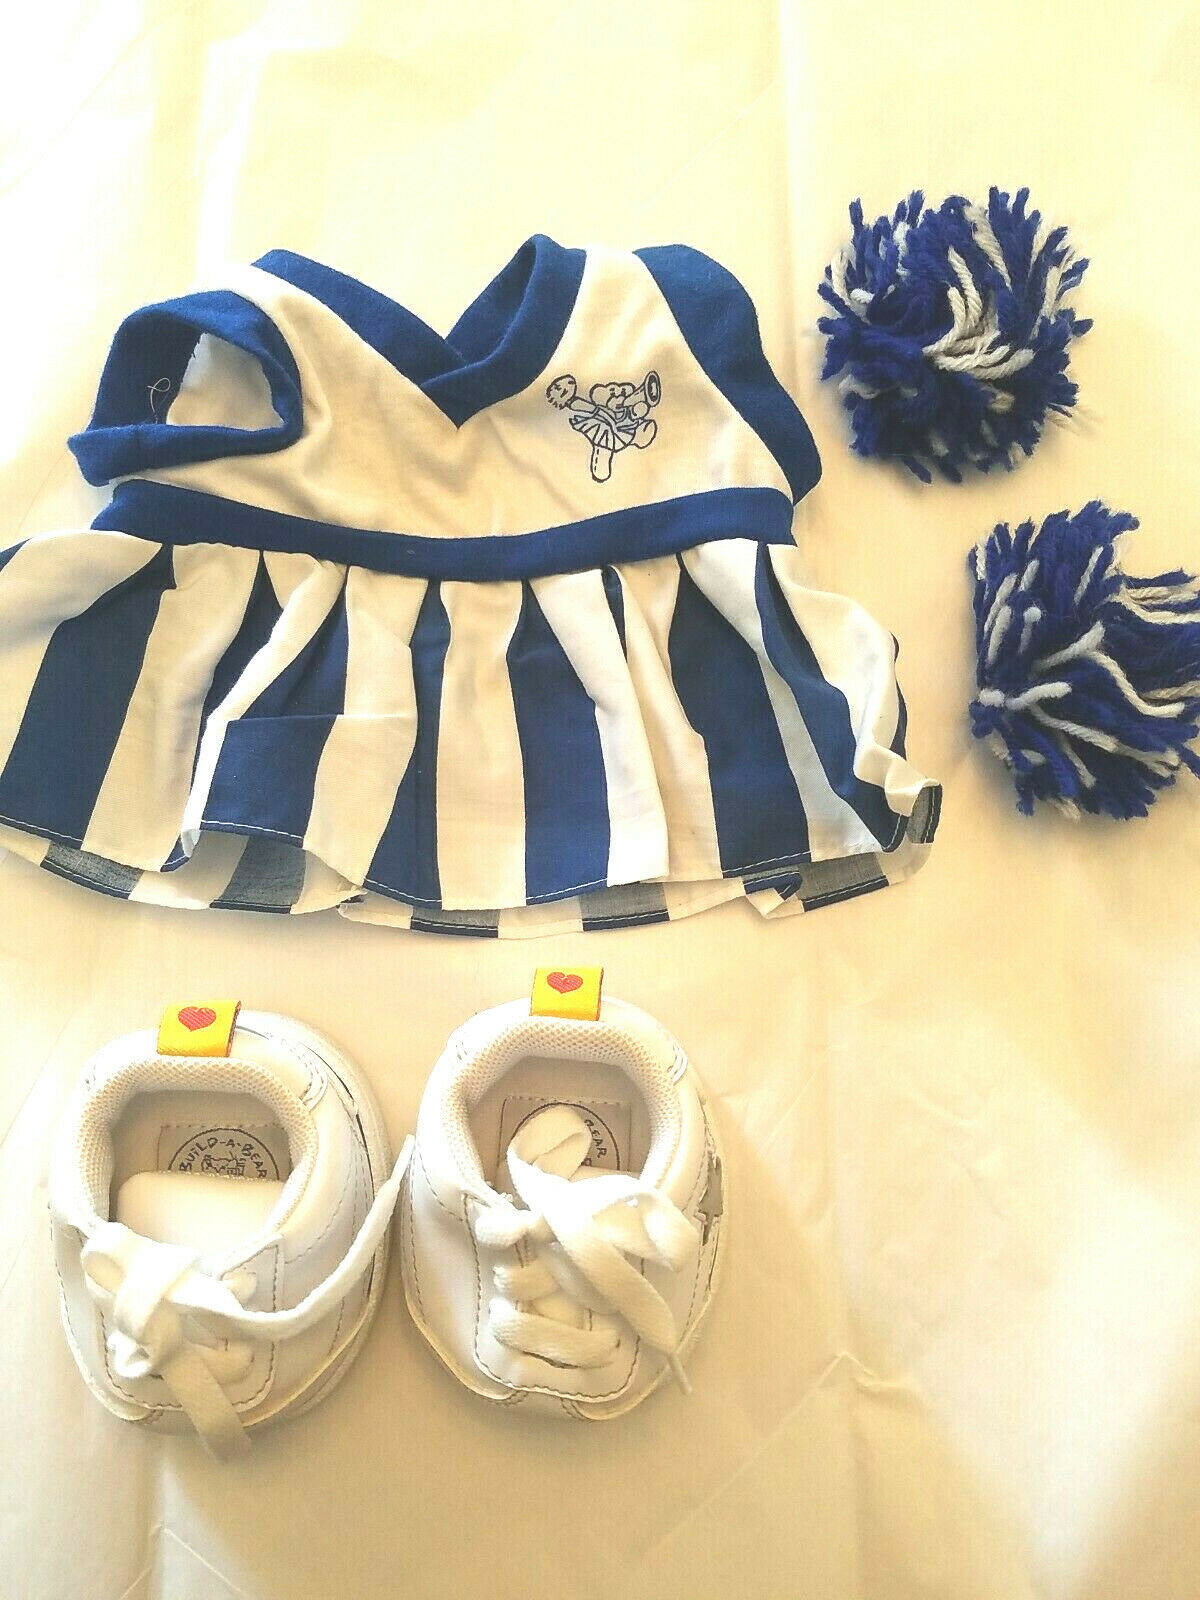 Build A Bear Cheerleader Outfit with Accessories - $19.99